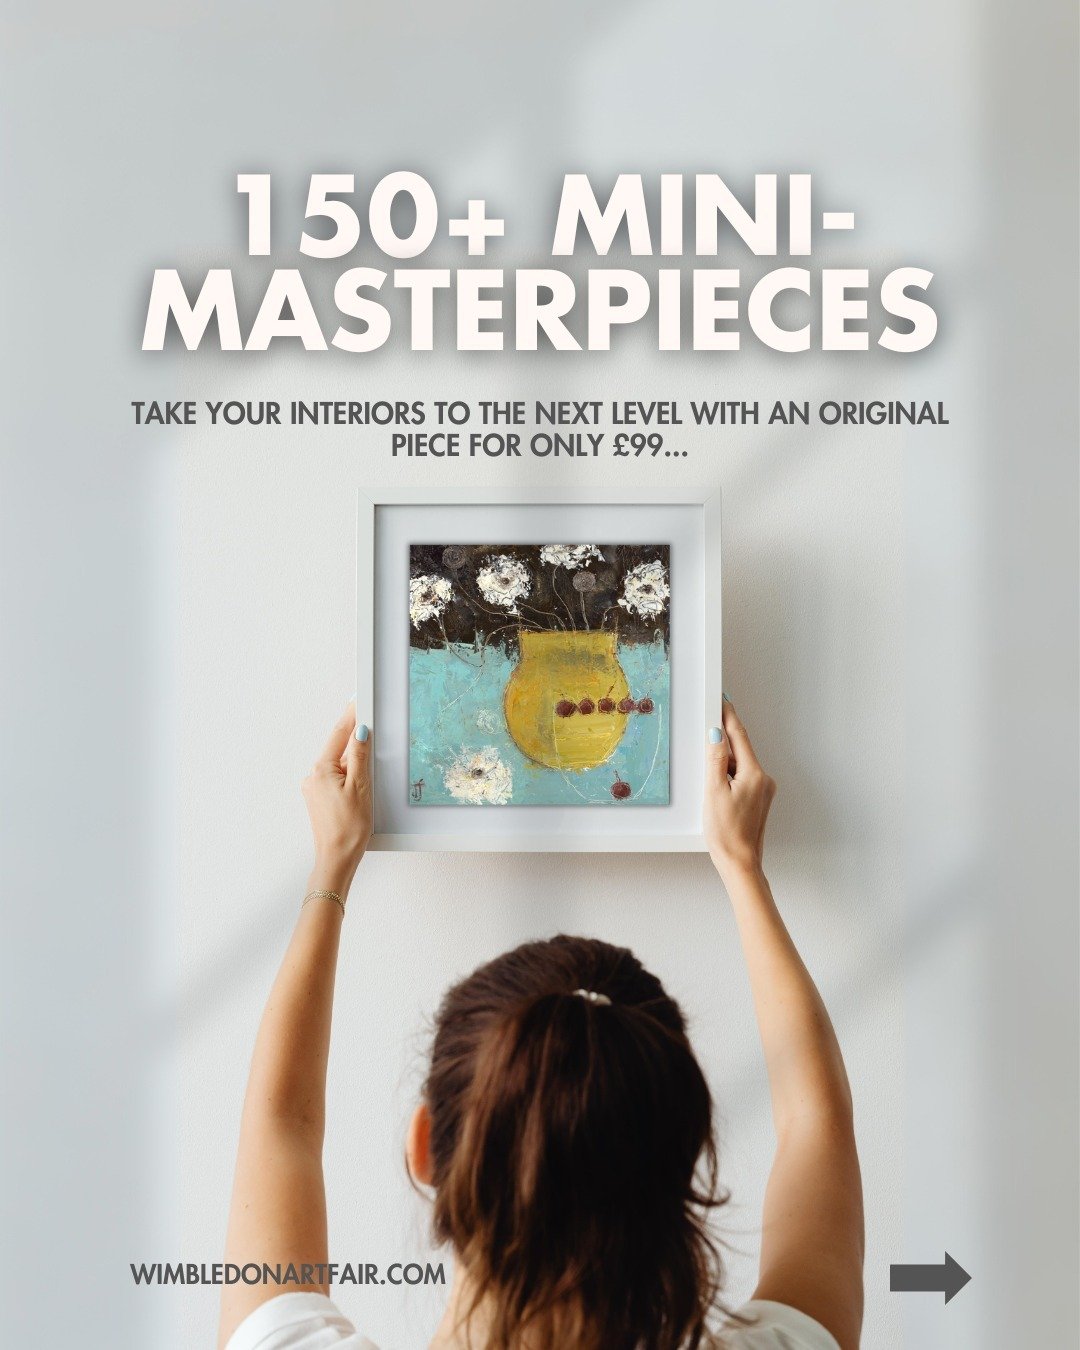 The Mini-Masterpiece online sale is your passport to a world of creativity and affordability! ✈️🖼️

𝗠𝗔𝗥𝗞 𝗬𝗢𝗨𝗥 𝗖𝗔𝗟𝗘𝗡𝗗𝗔𝗥𝗦
Tuesday, 30th of April.

With over 150 original works of art, each priced at just &pound;99, spanning paintings,